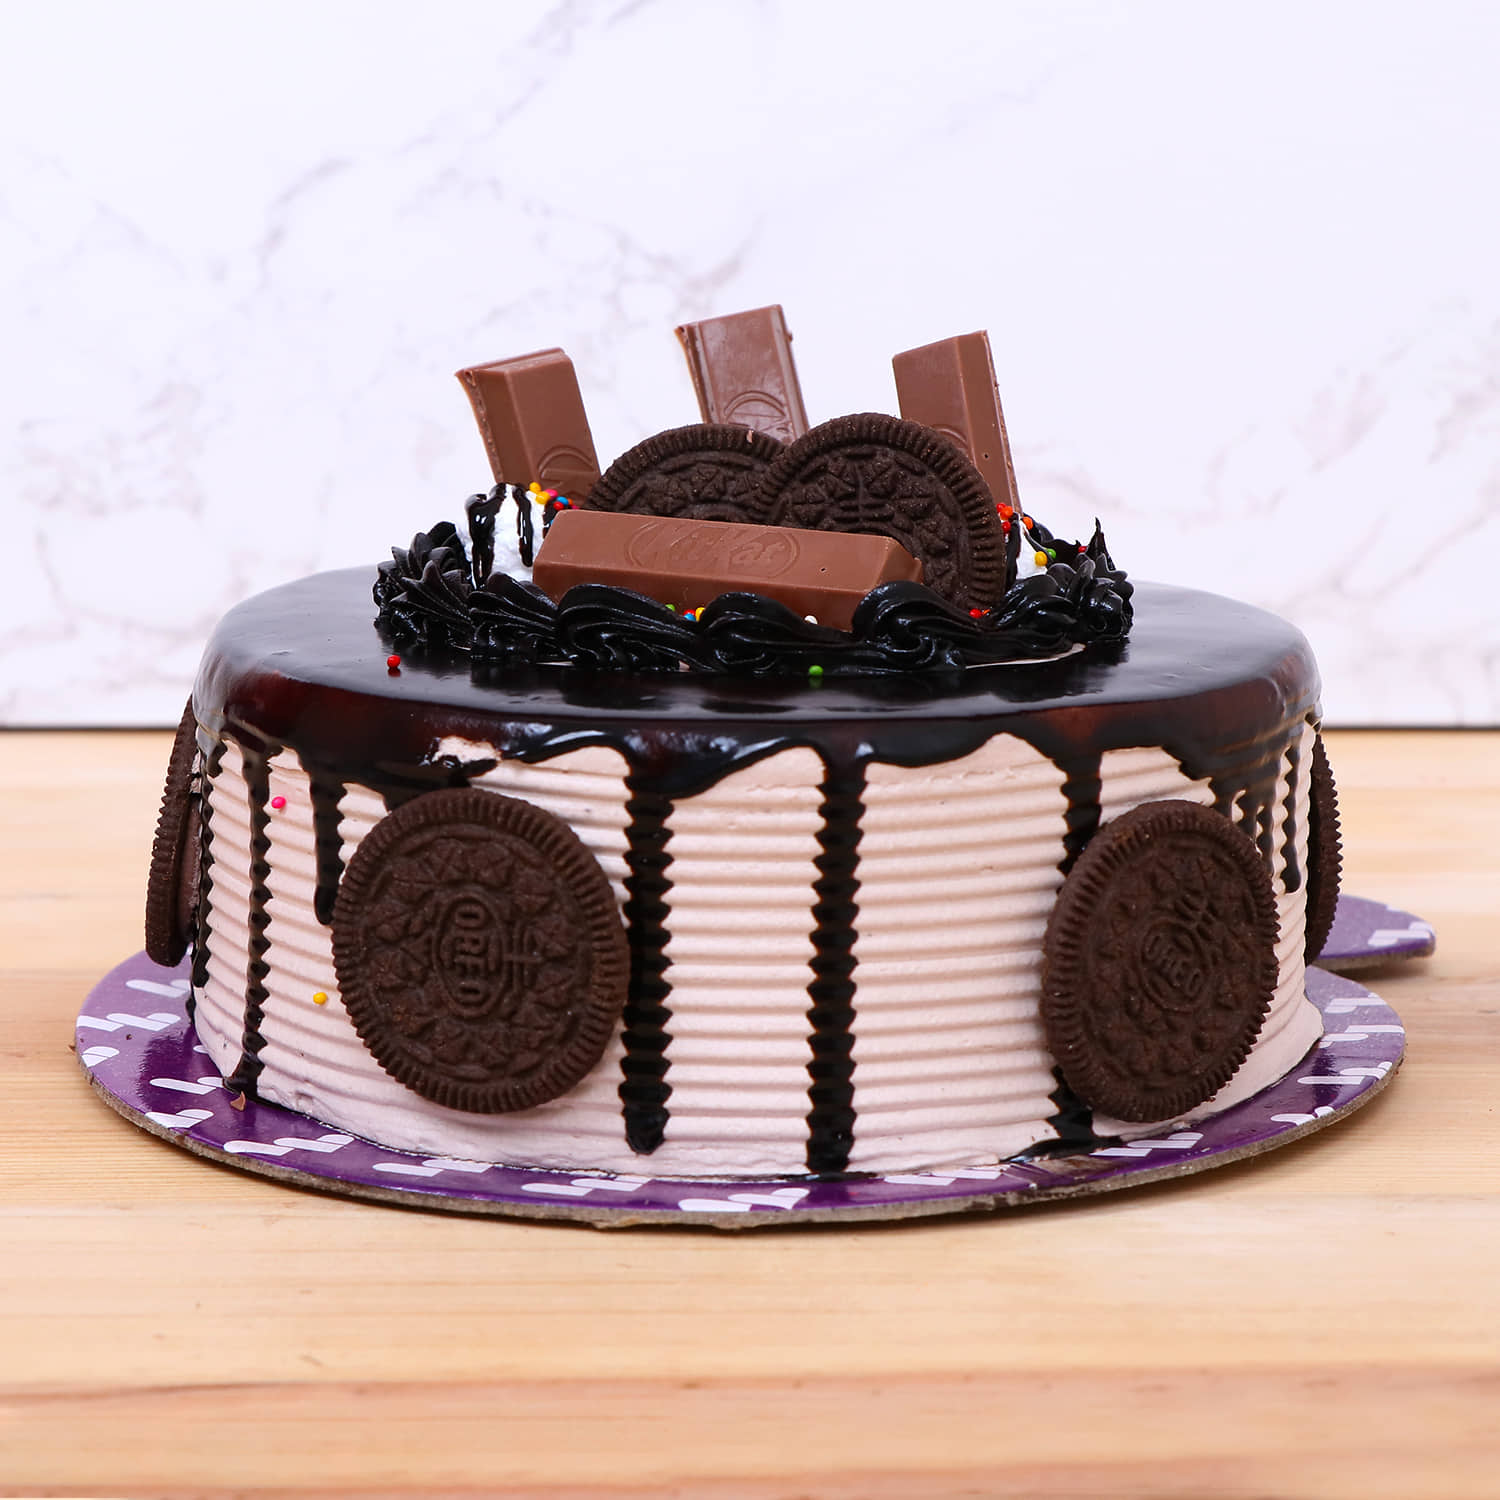 Oreo Biscuit Cake in Just 10 Minutes - Instant Cake Recipe